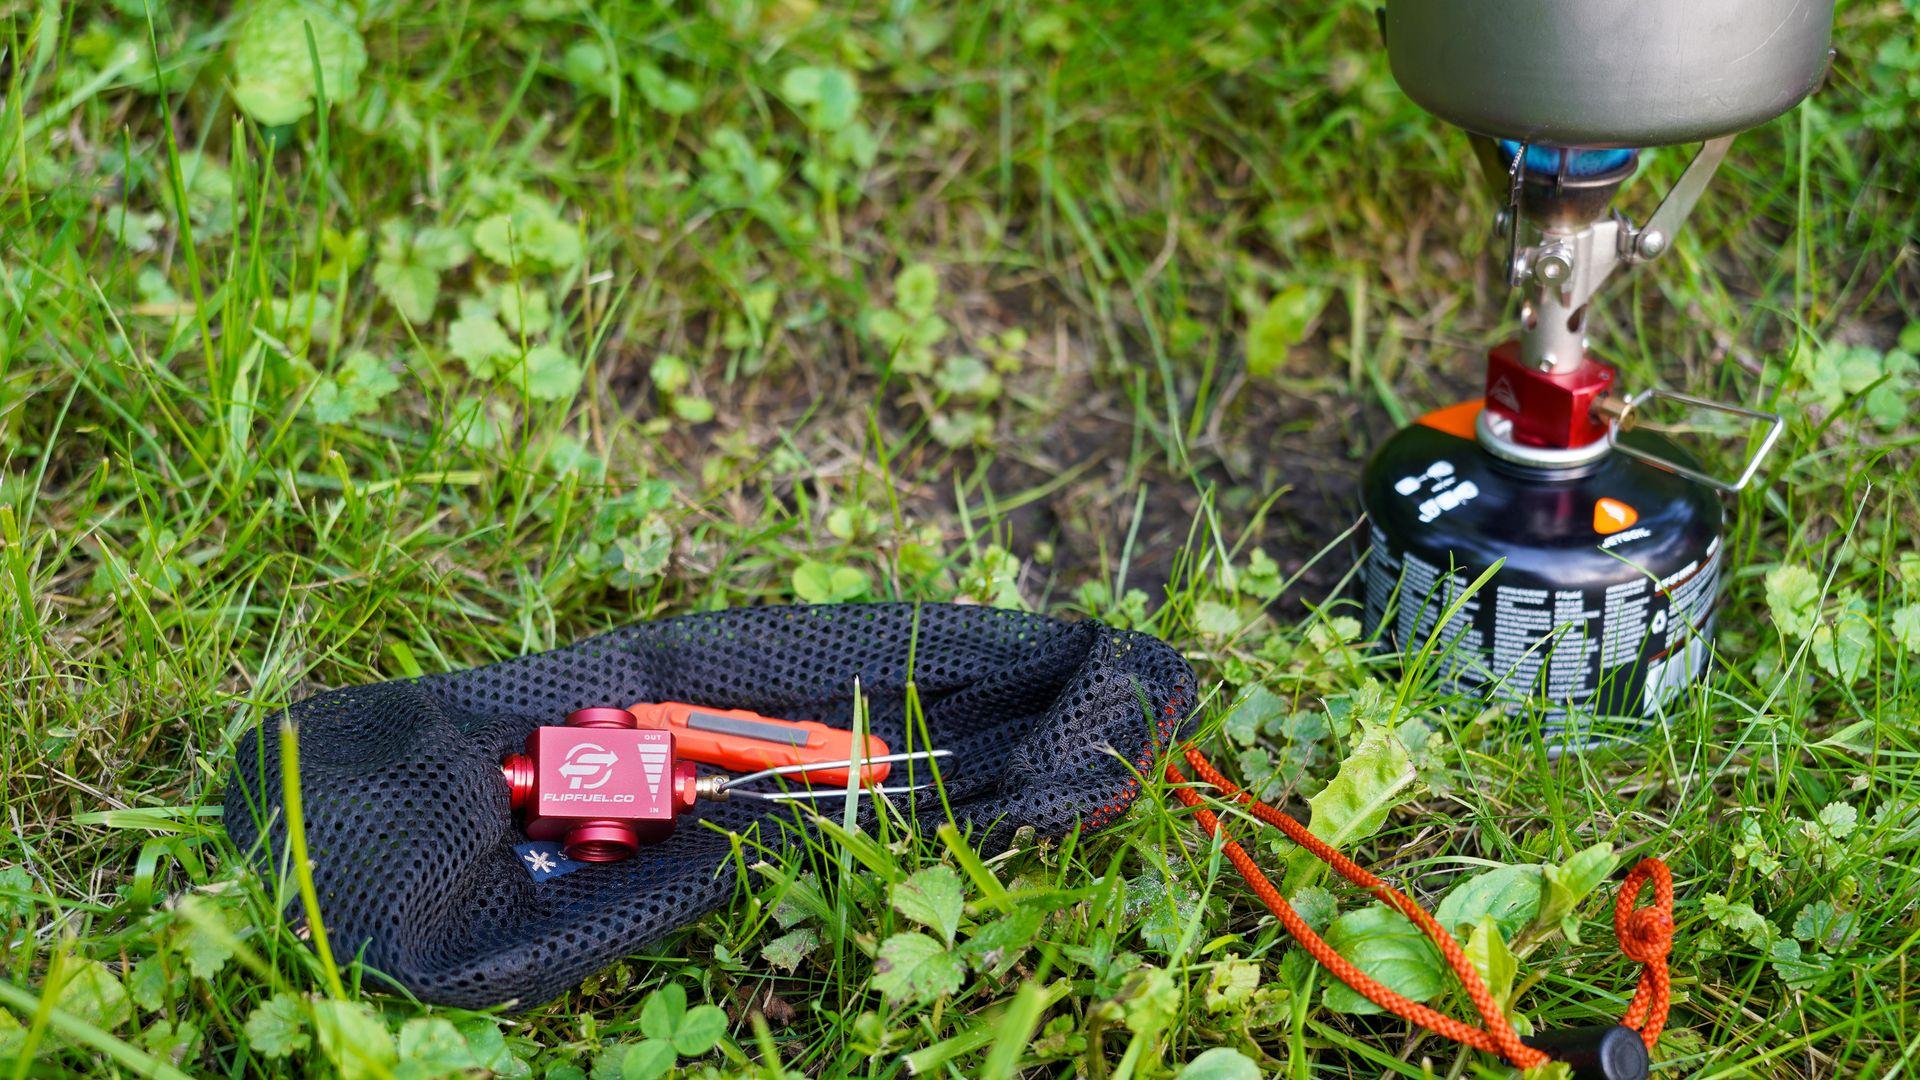 A FlipFuel sits on a bag in the grass next to FlipFuel being used to transfer fuel.